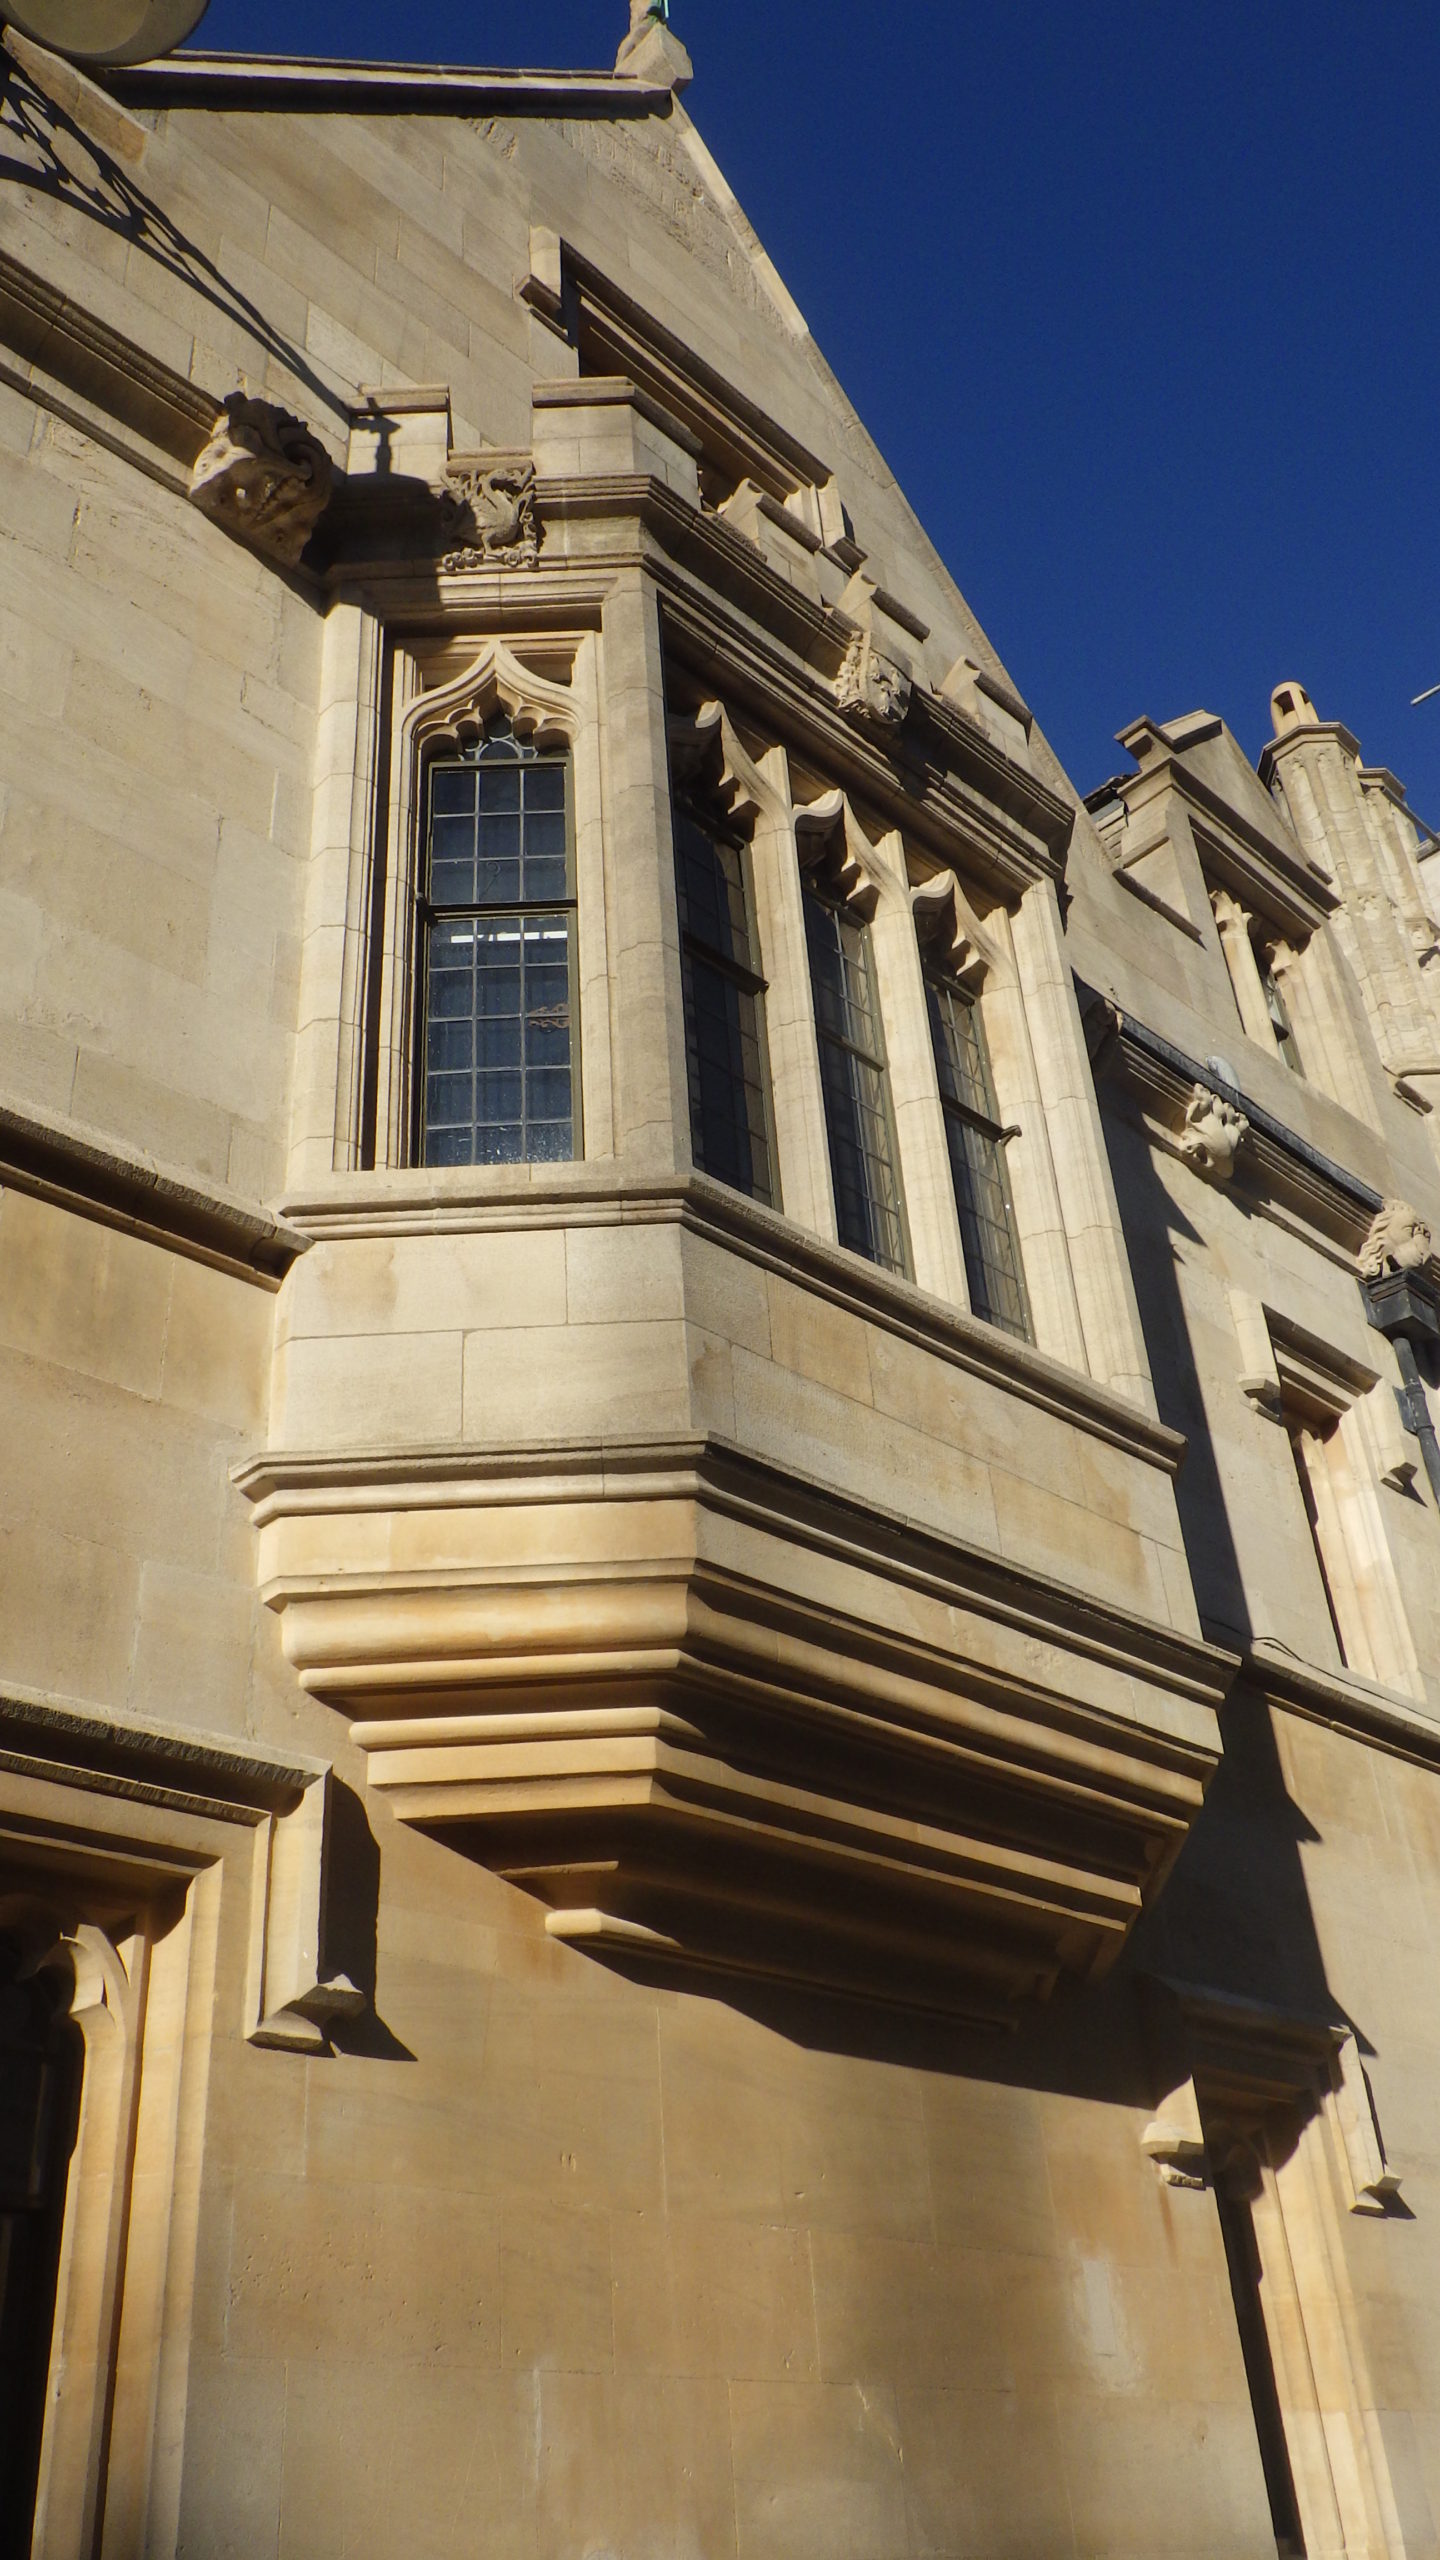 Repairing An Oxford College - Exterior Of Stone Building